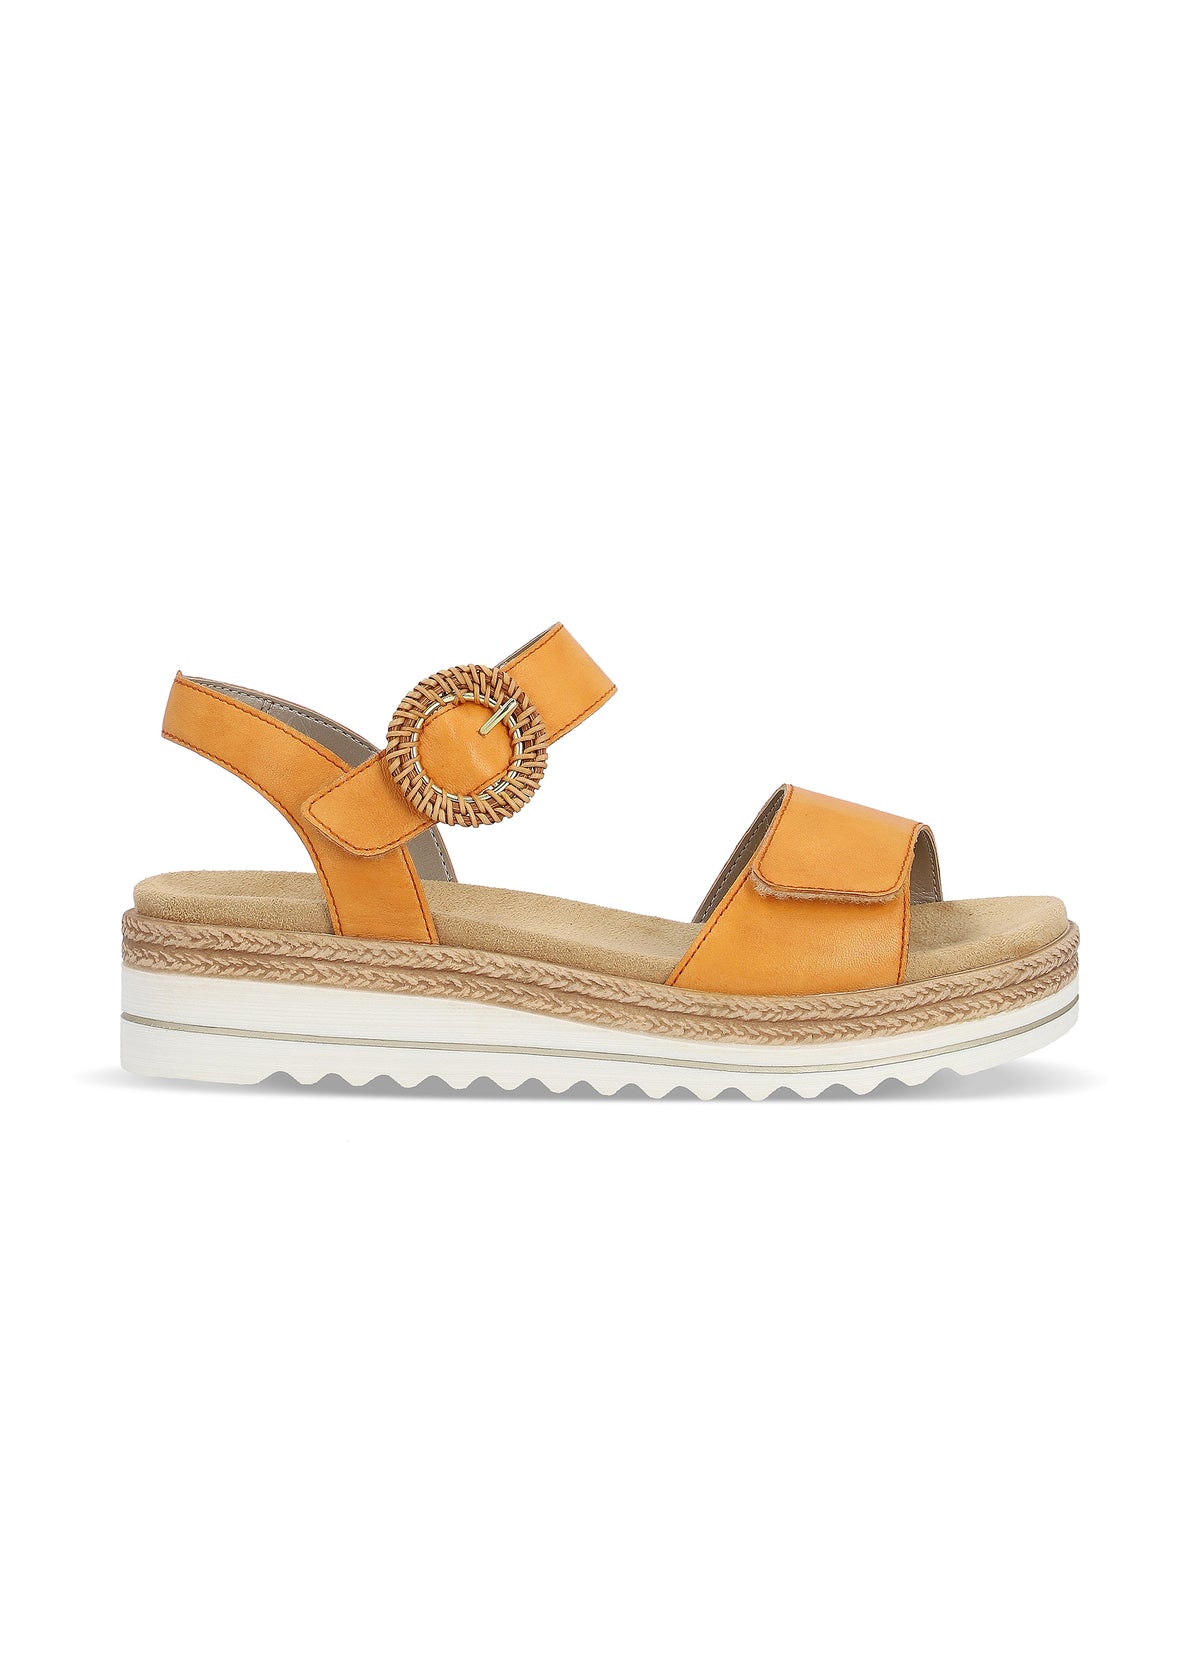 Sandals with a thick sole - mandarin yellow, buckle decoration